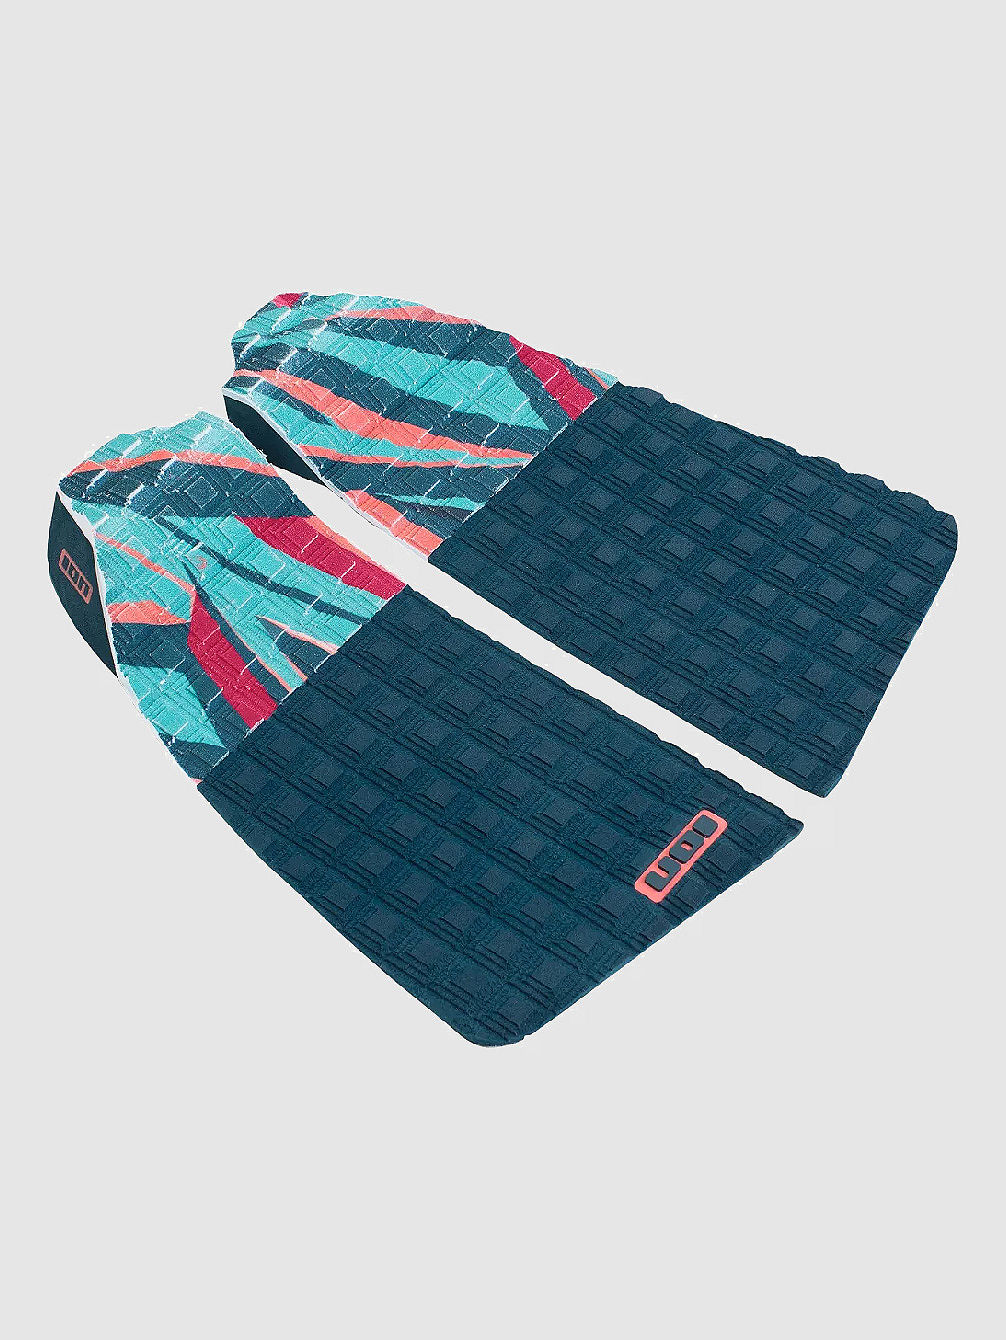 Muse (2Pcs) Traction Tailpad